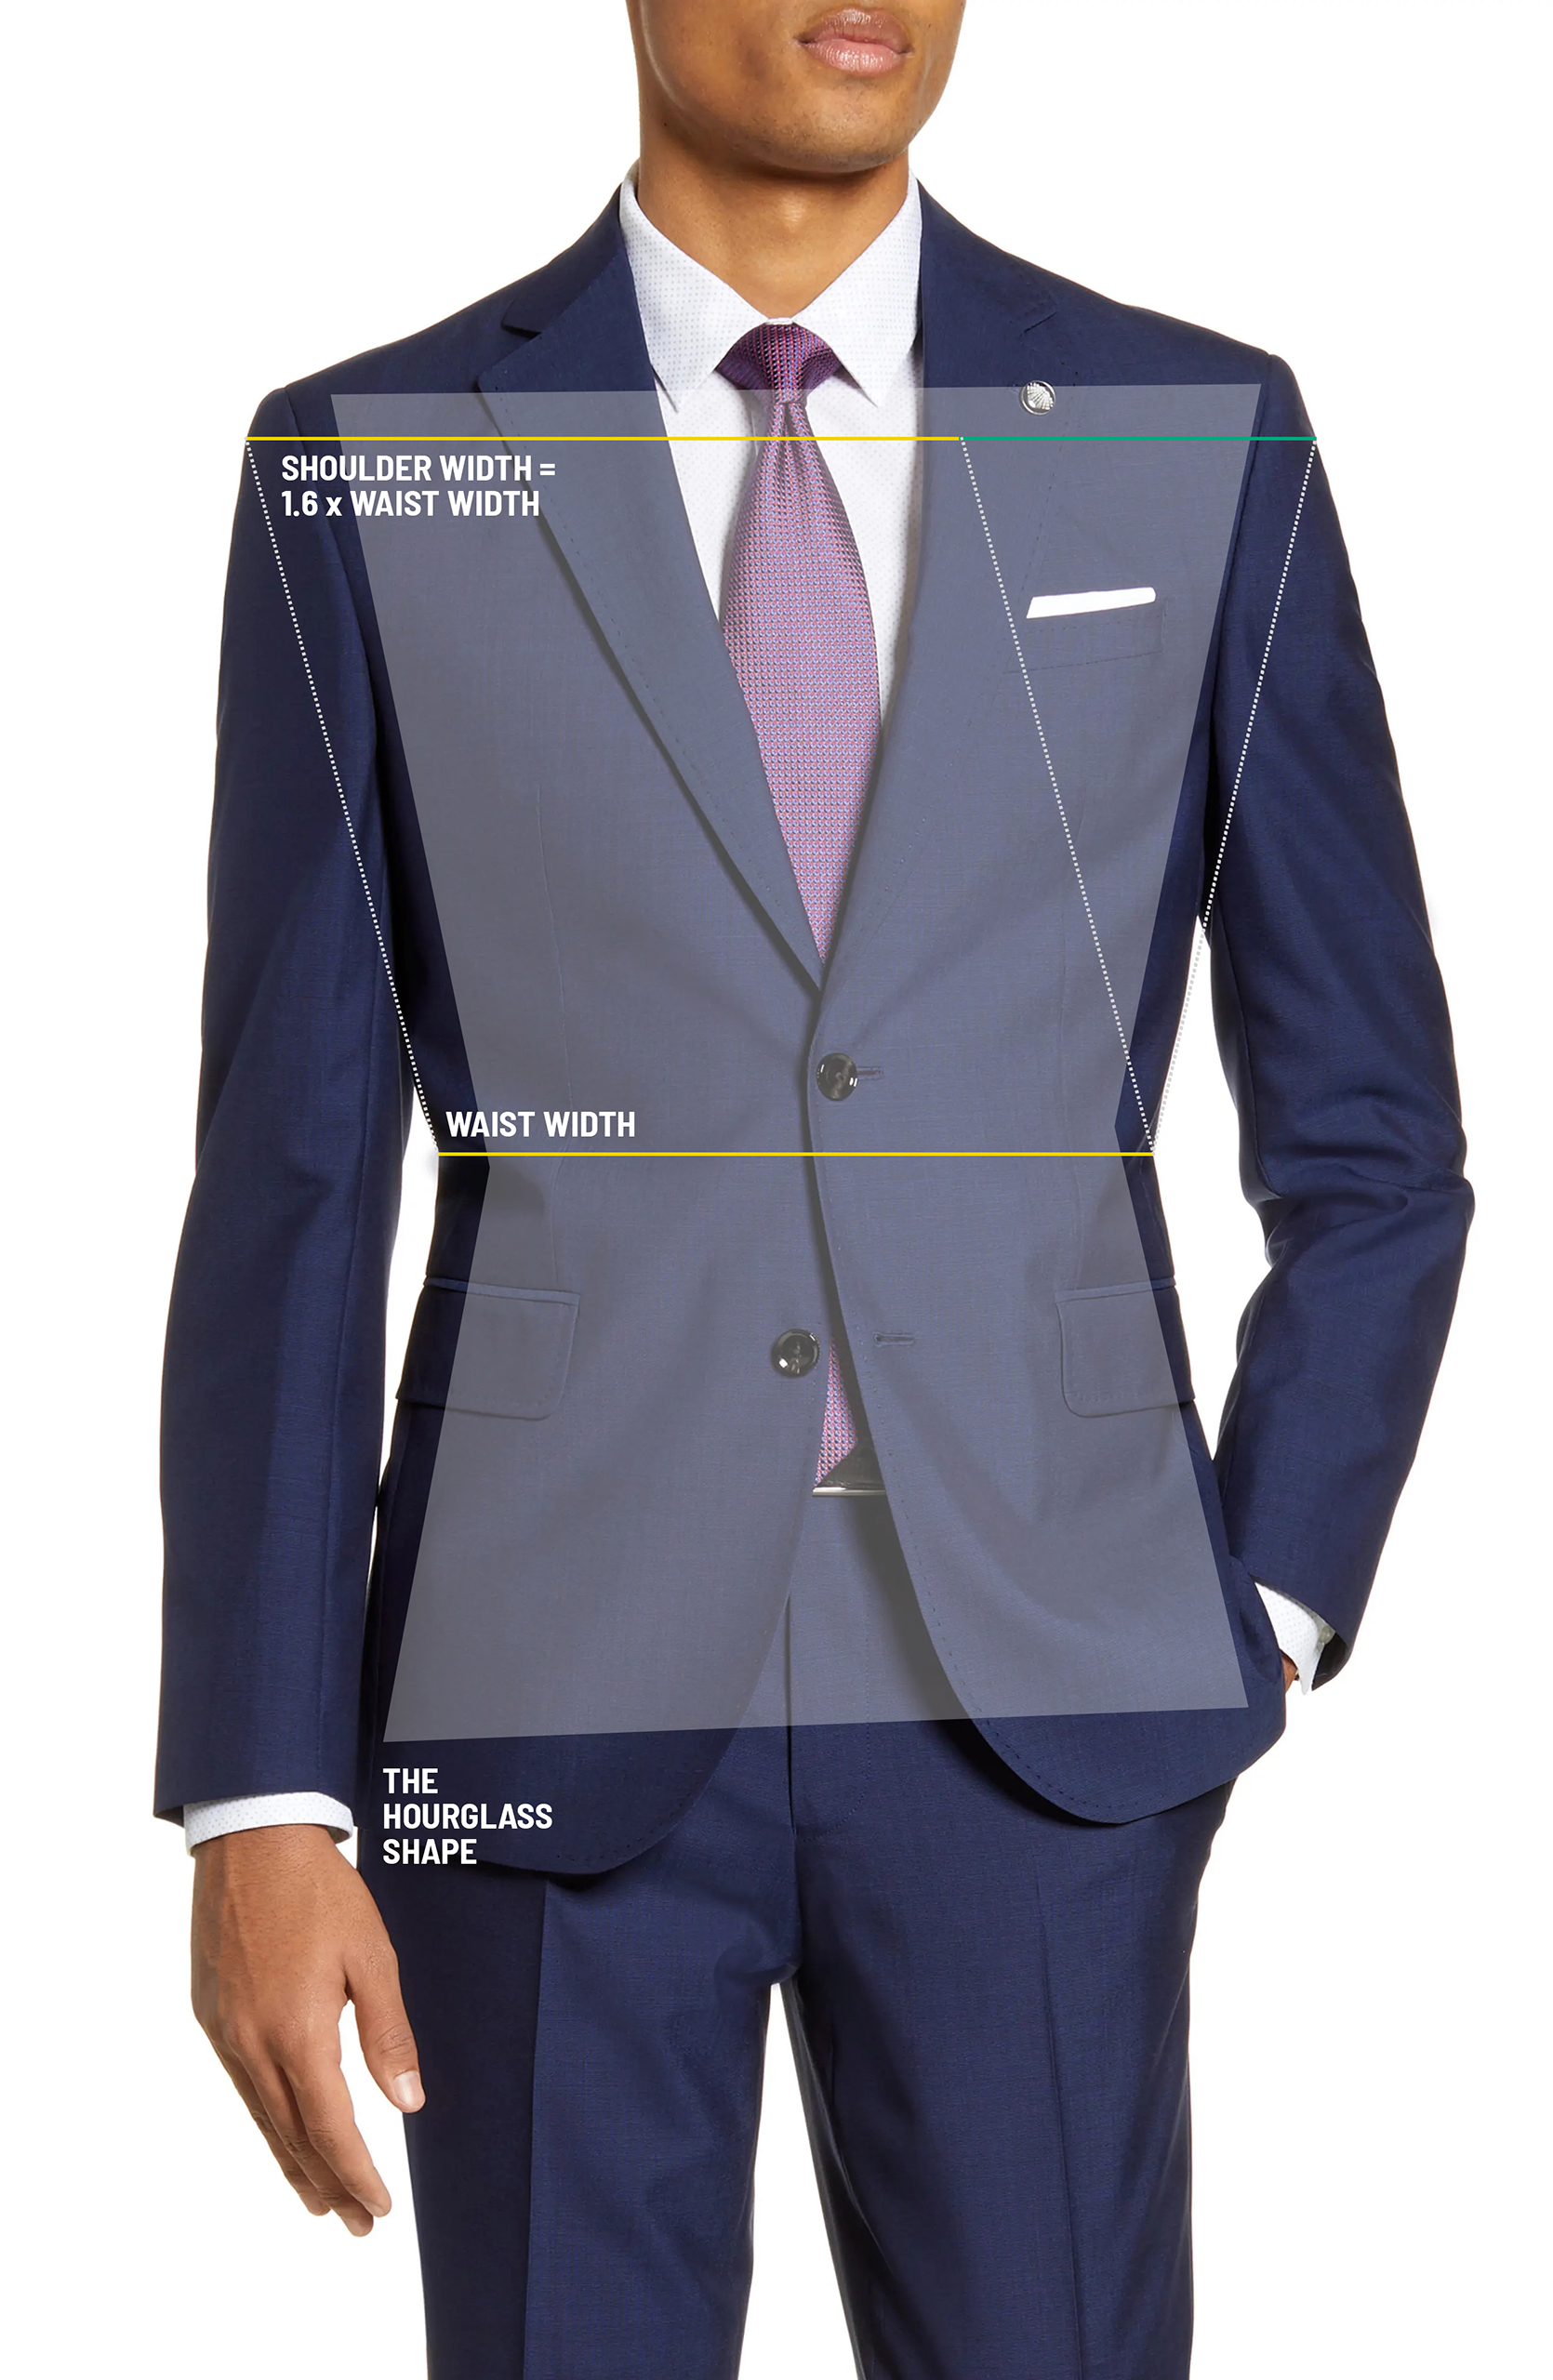 The hourglass shape of a perfect-fitting suit